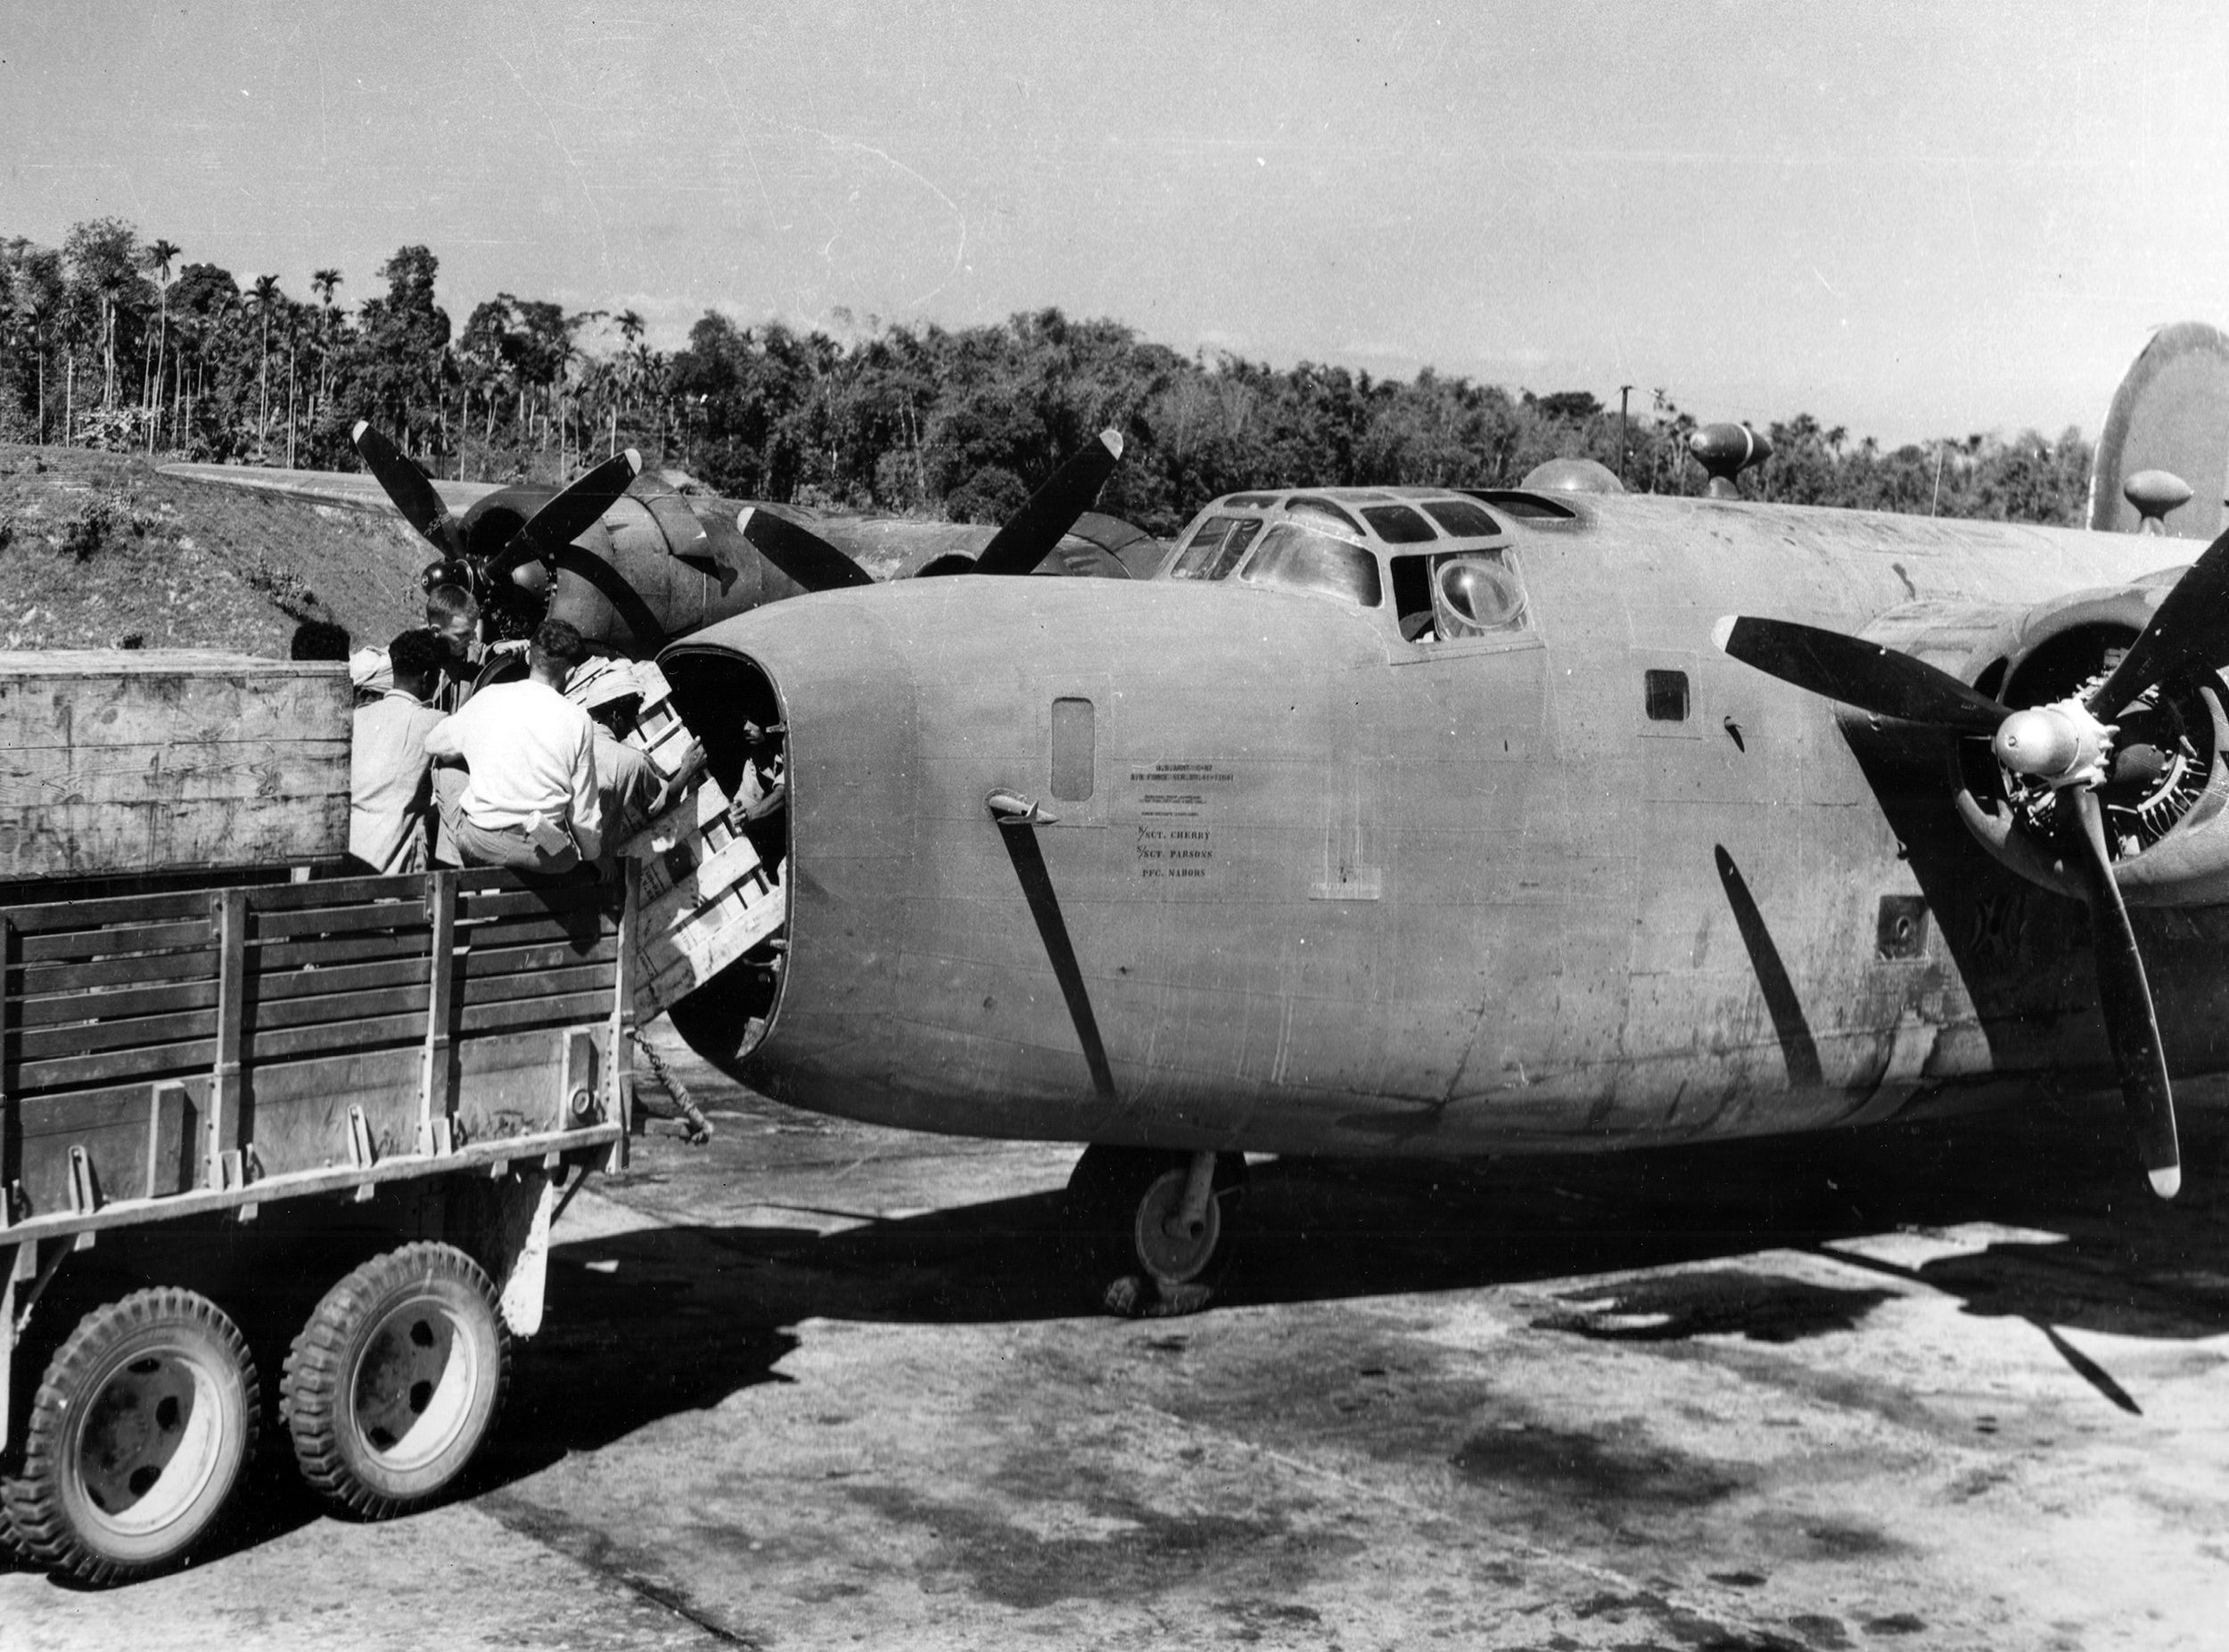 Men transfer naval stores from a truck into the nose of a Consolidated C-87 for shipment to China. The nose of this plane provides cargo space for three drums of gasoline and a 500-pound bomb or its equivalent. 